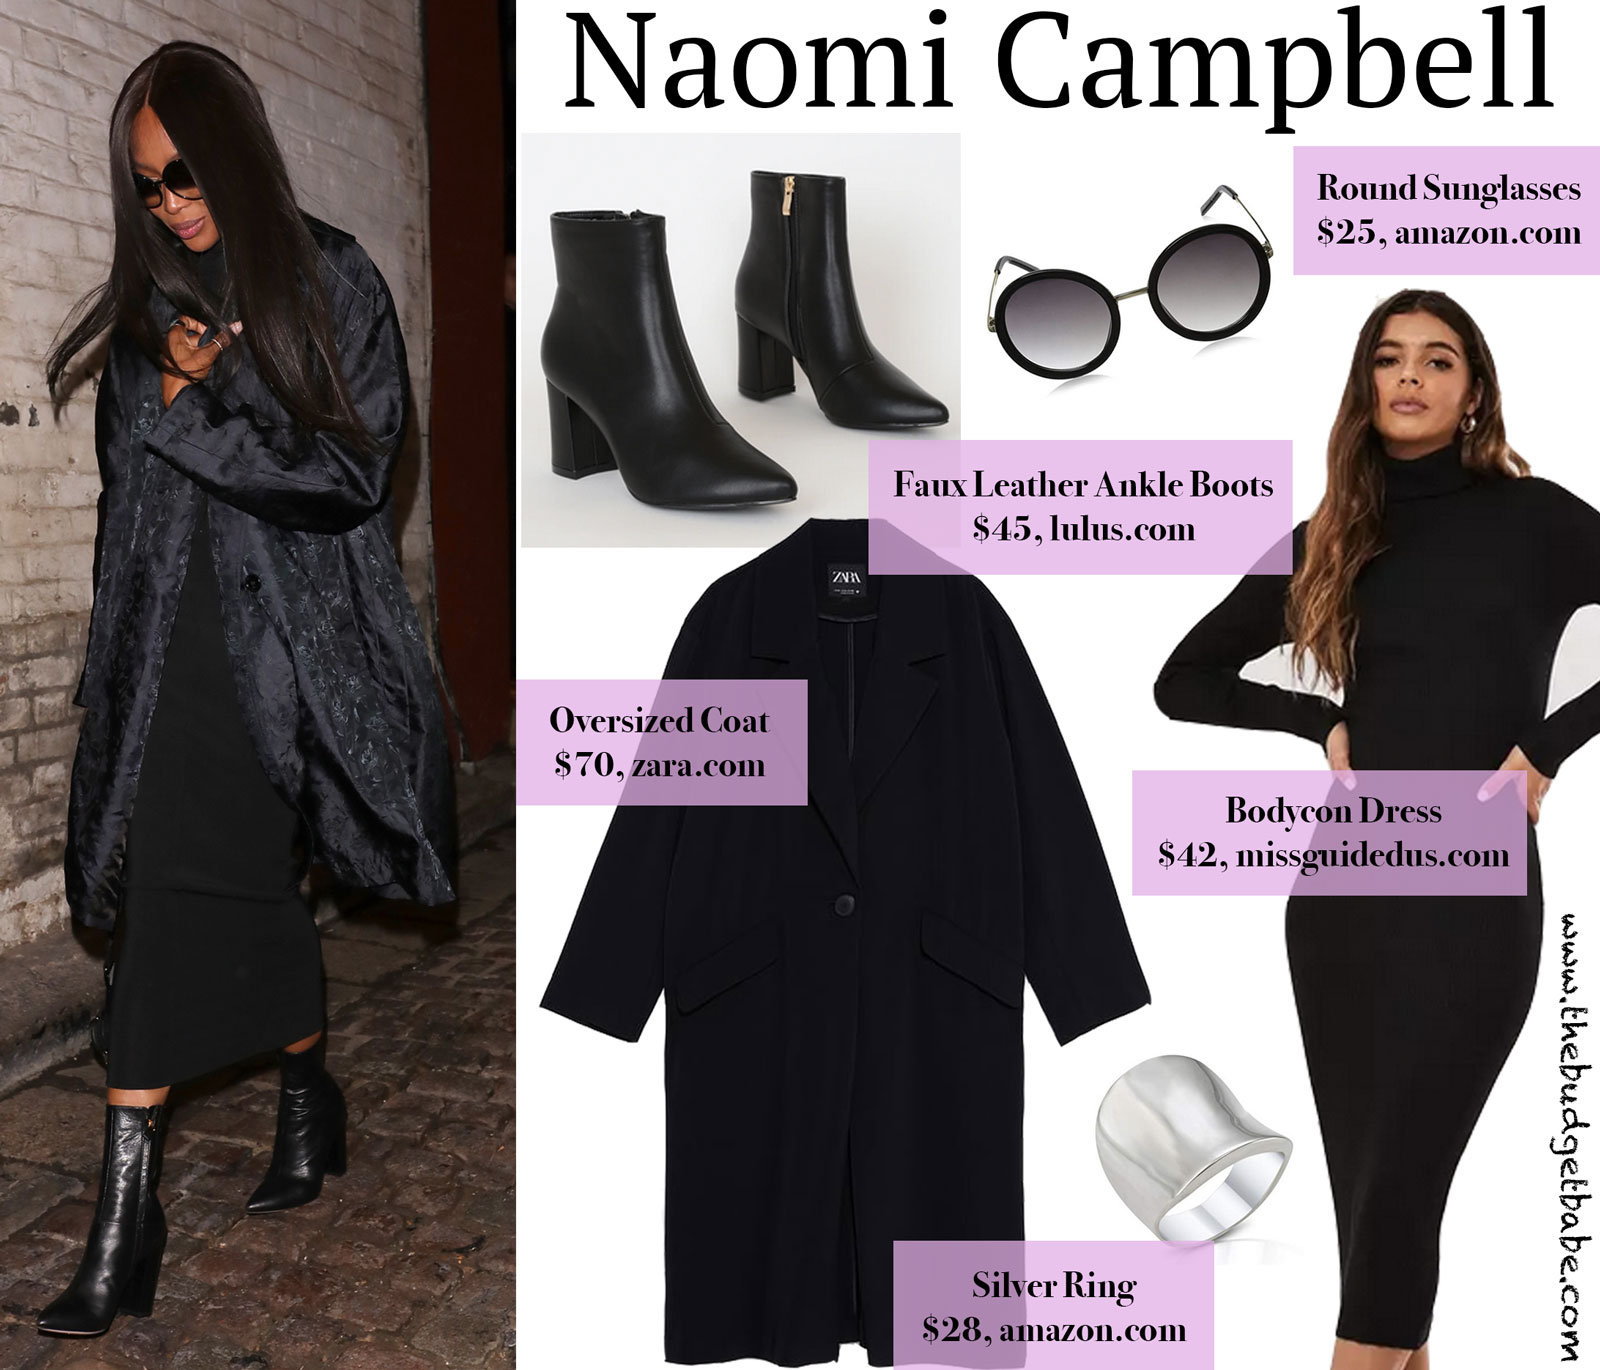 Naomi Campbell Black Coat and Boots Look for Less